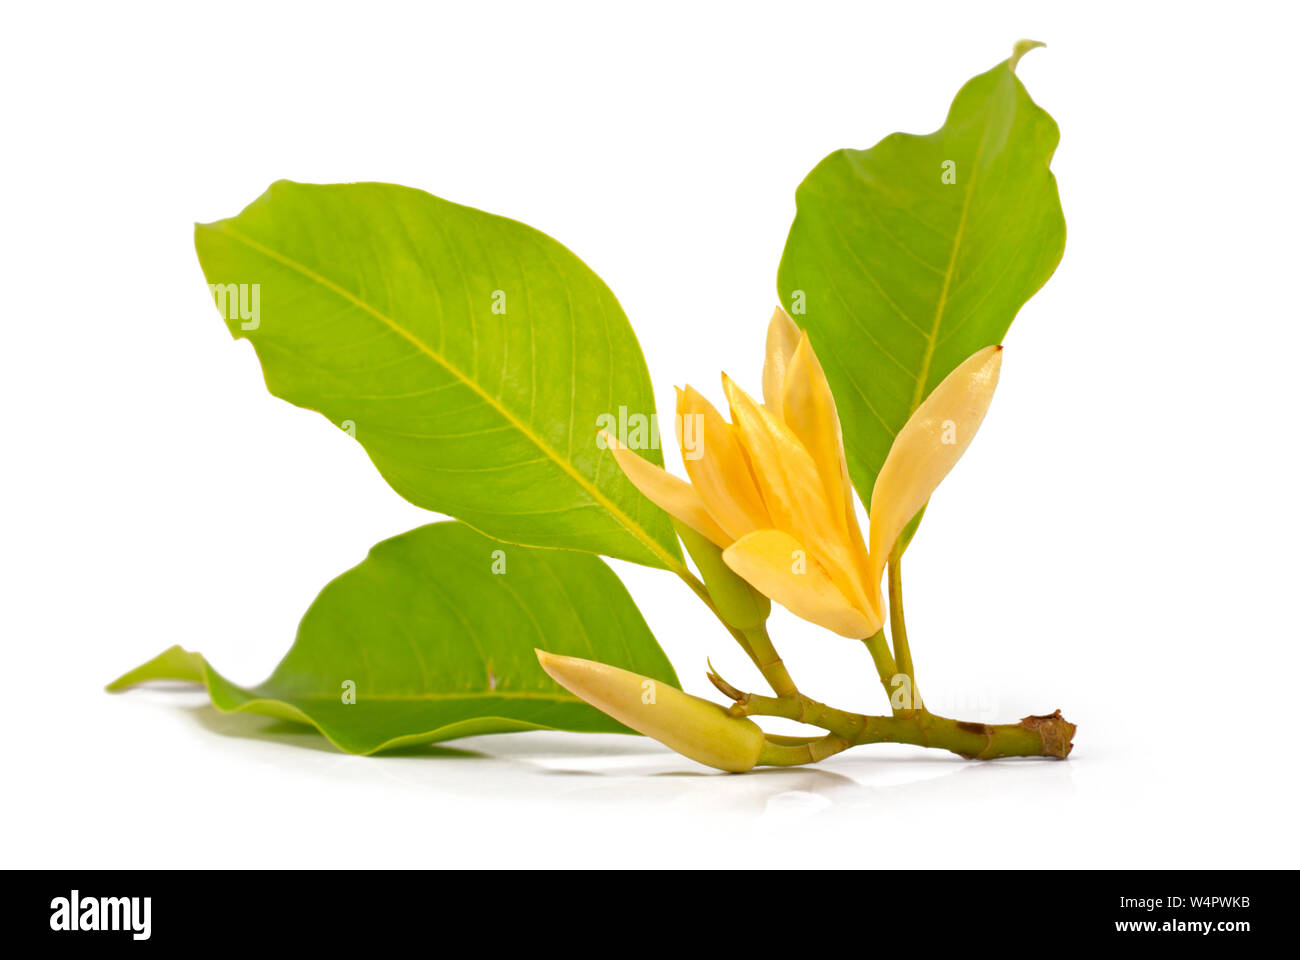 michelia champaca flower cut out on white background Stock Photo